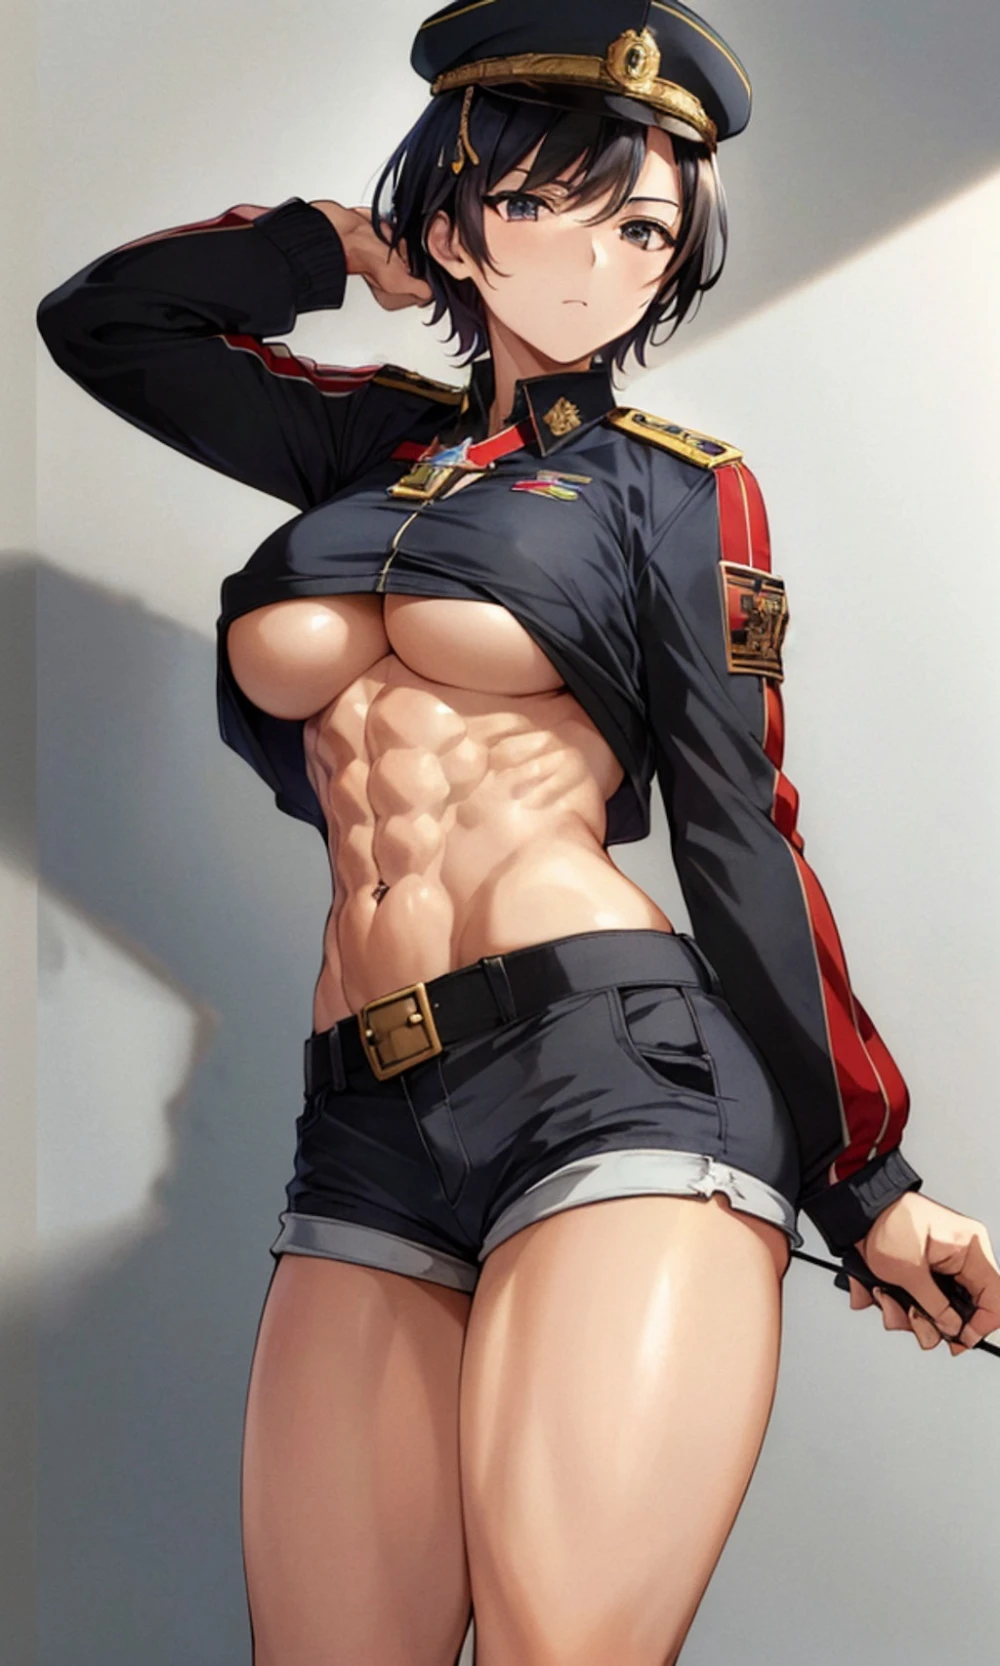 military-uniform-anime-style-all-ages-48